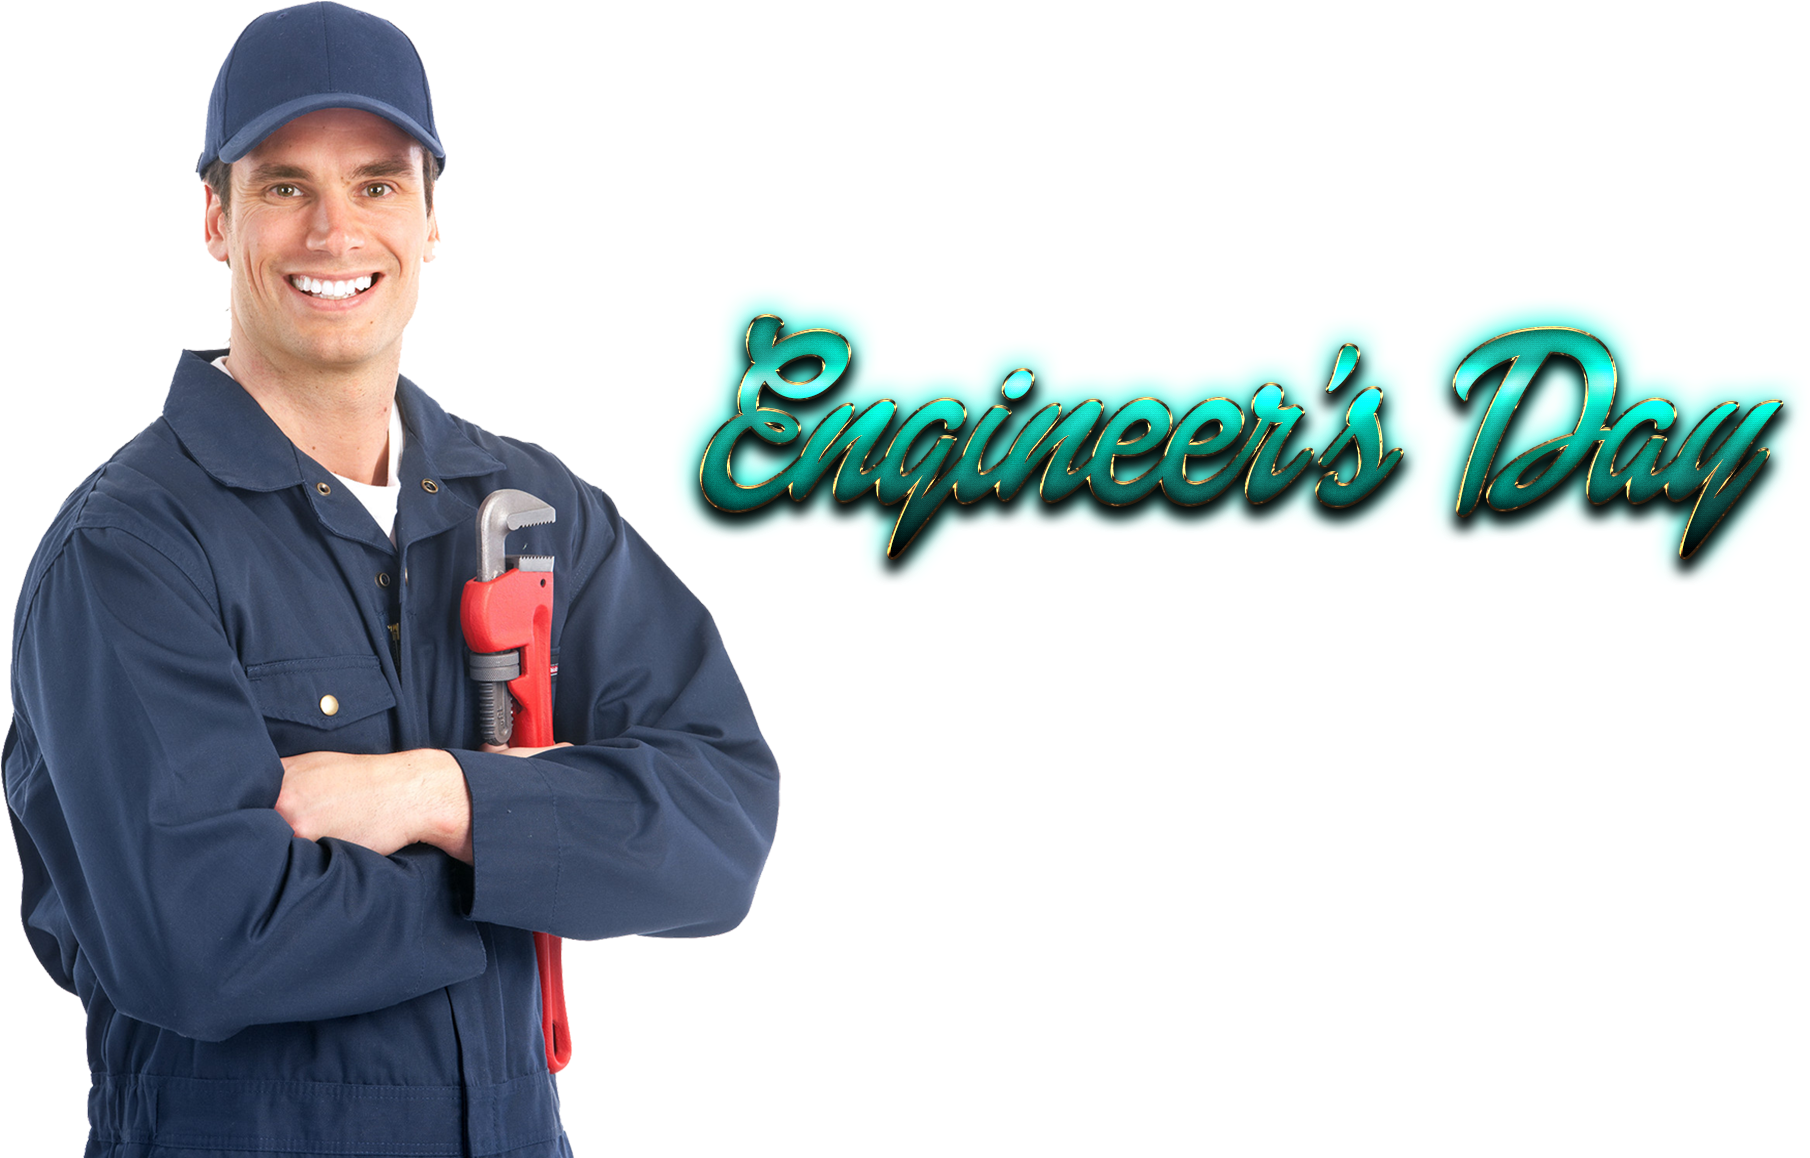 A Man In A Blue Uniform With A Wrench